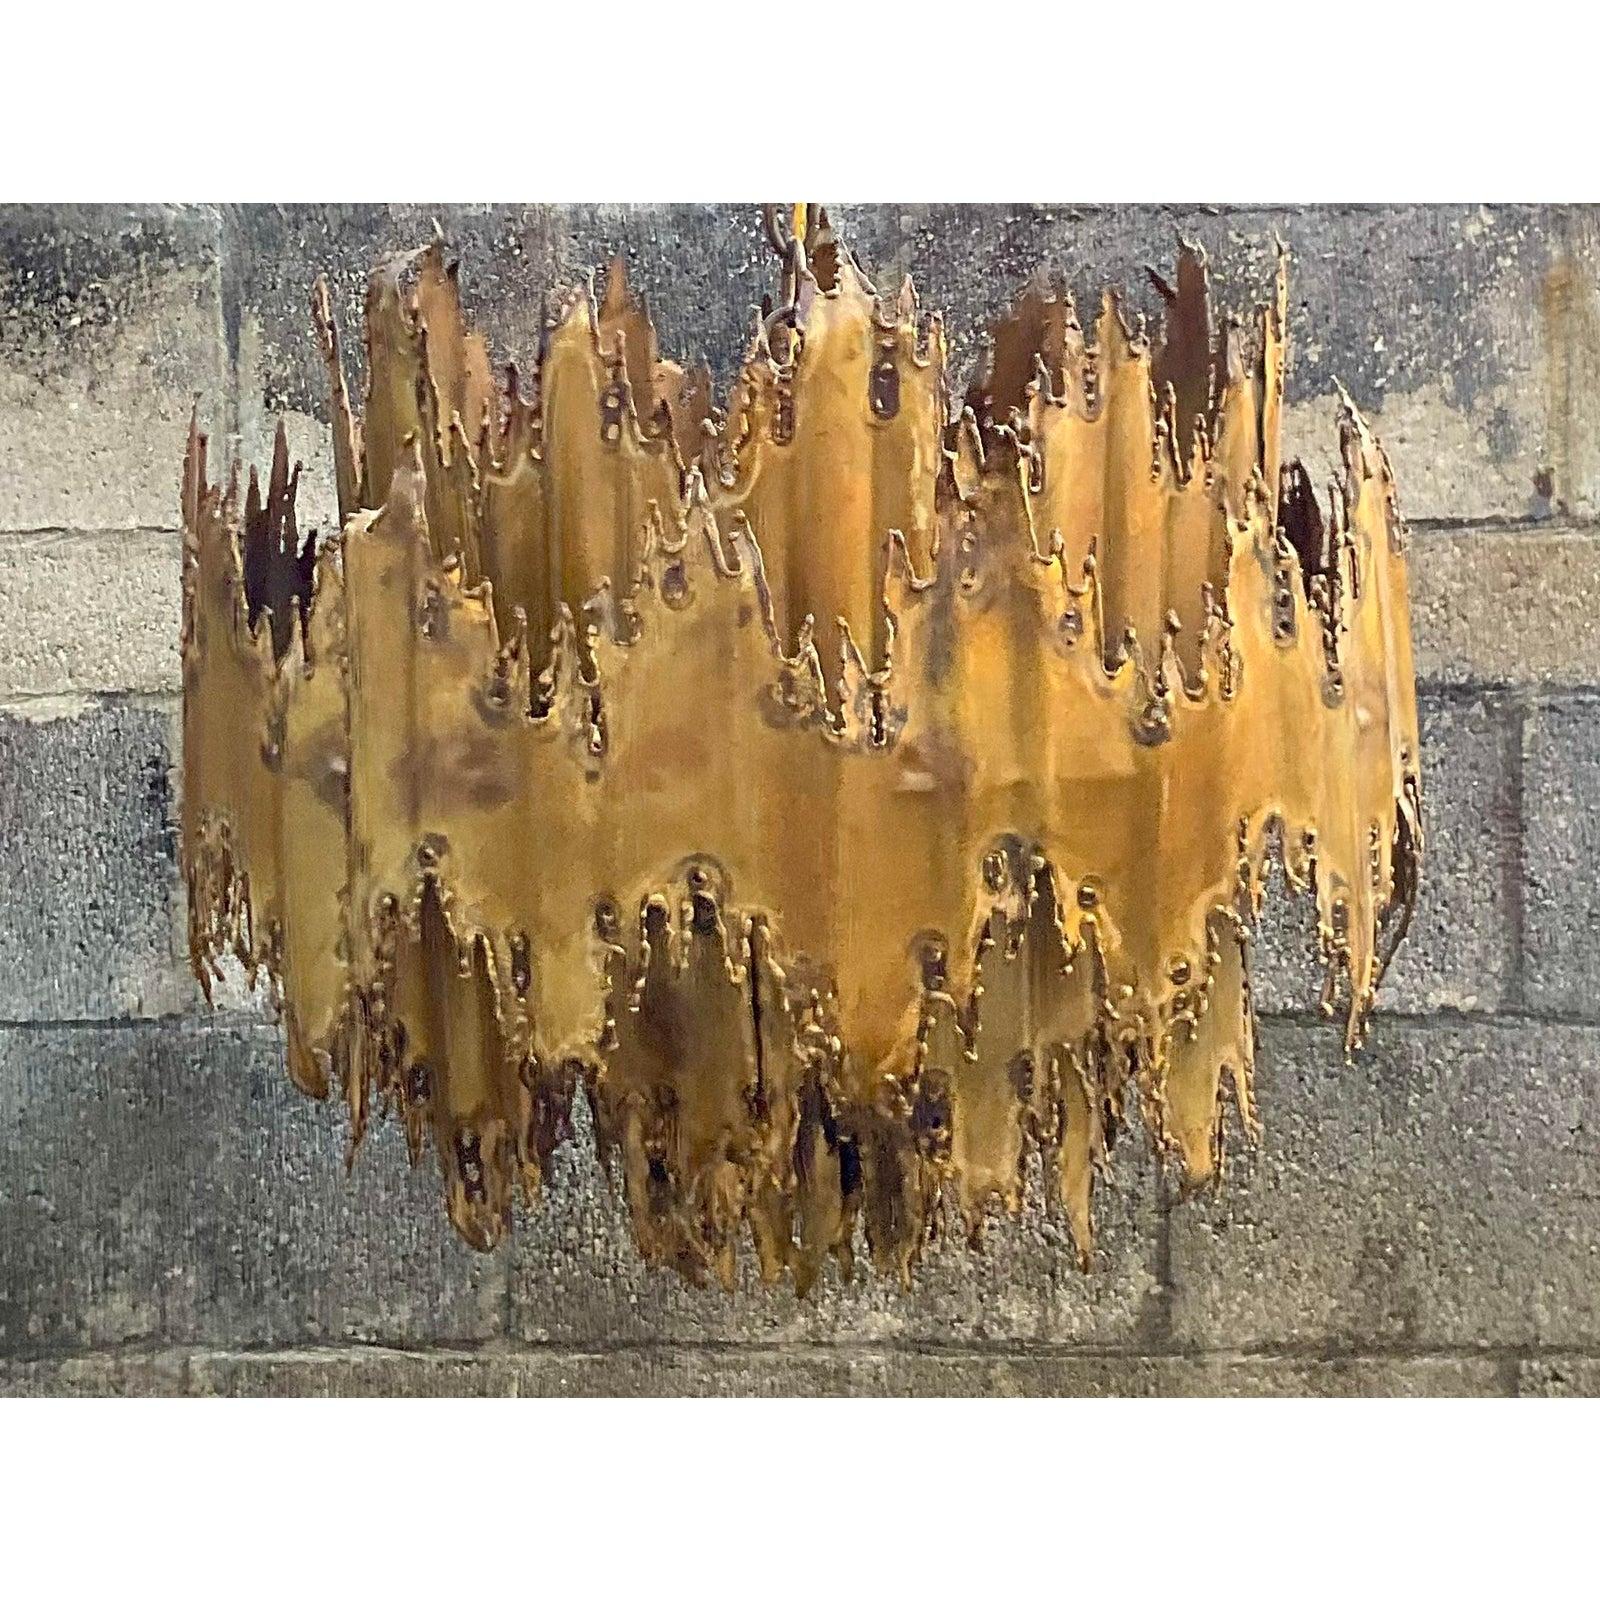 A fantastic authentic Tom Greed chandelier. Striking torch cut edges make this chandelier a real work of art. Five layers of brass with brilliant patina. Brutalist flush mount cap. Unmarked. Acquired from a Palm Beach estate.